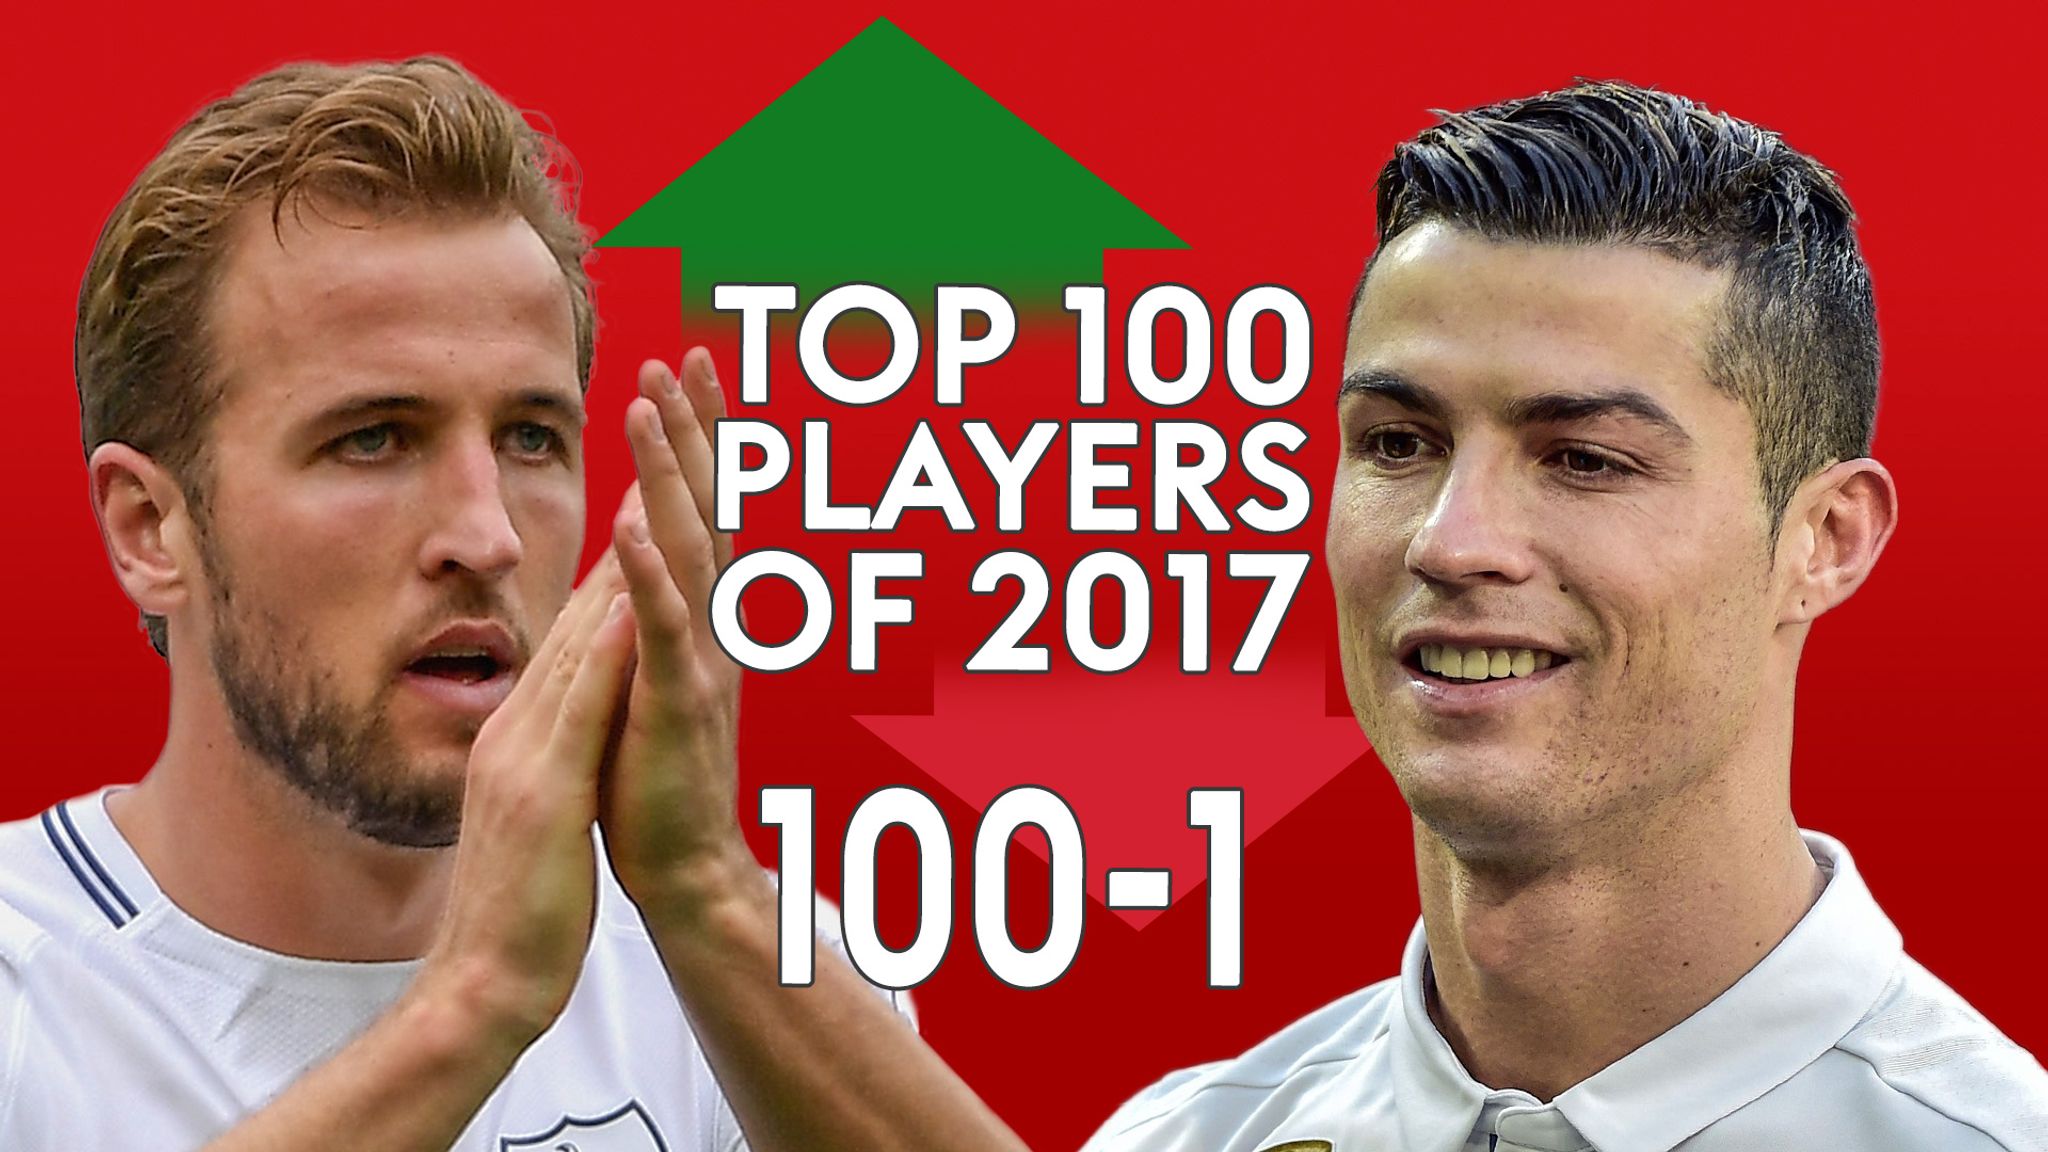 Top 10 Best Players in the World 2017 